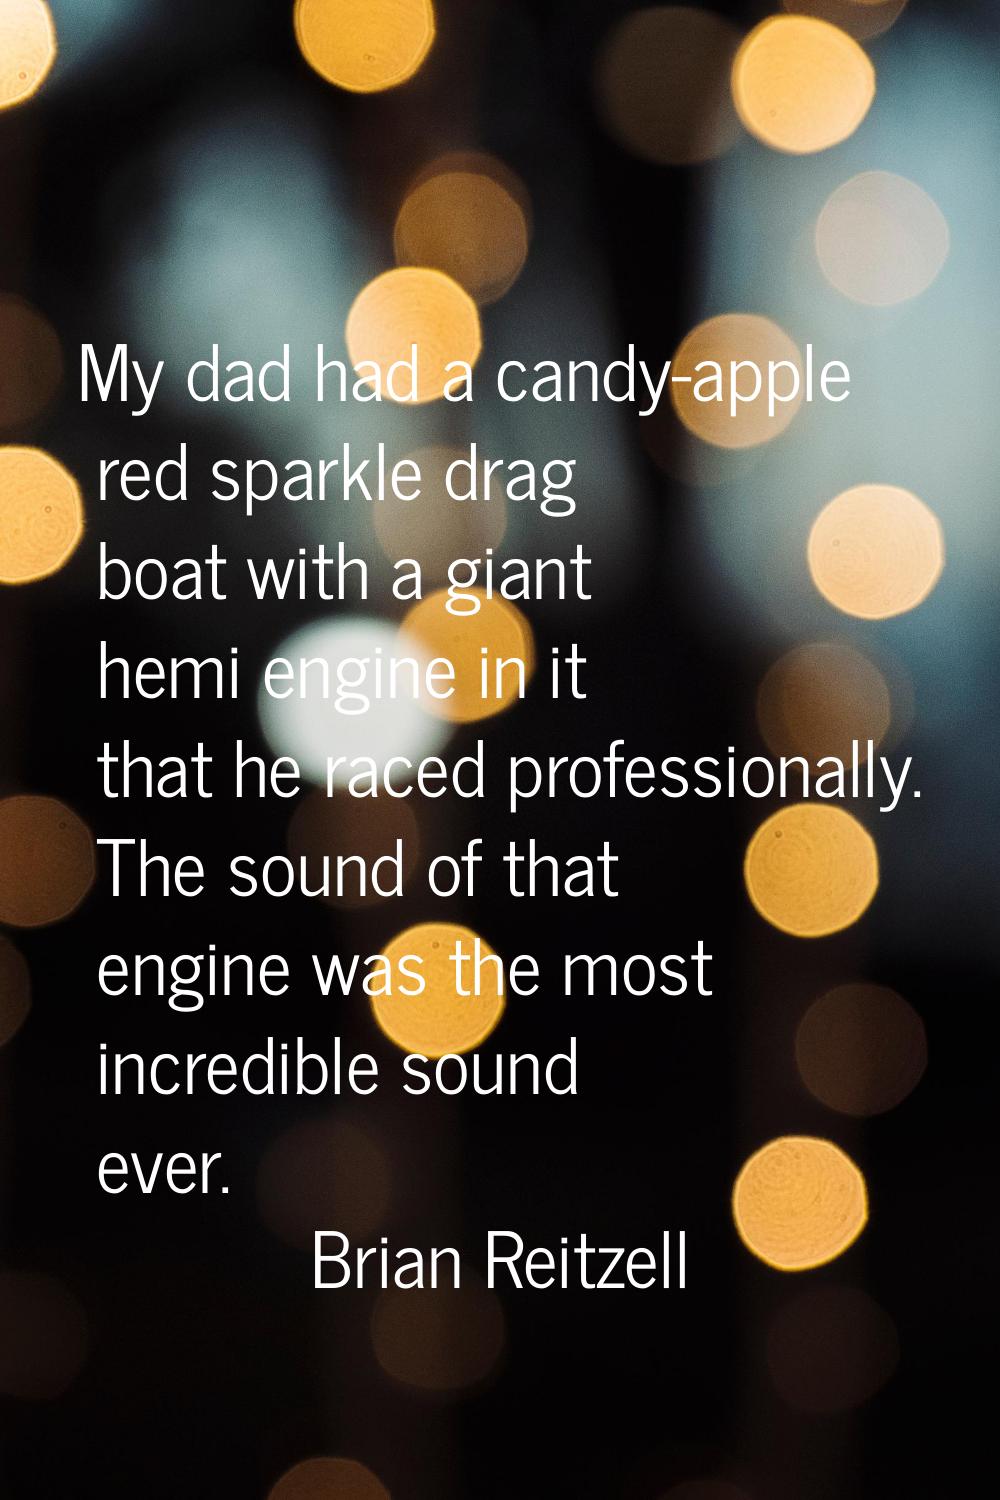 My dad had a candy-apple red sparkle drag boat with a giant hemi engine in it that he raced profess